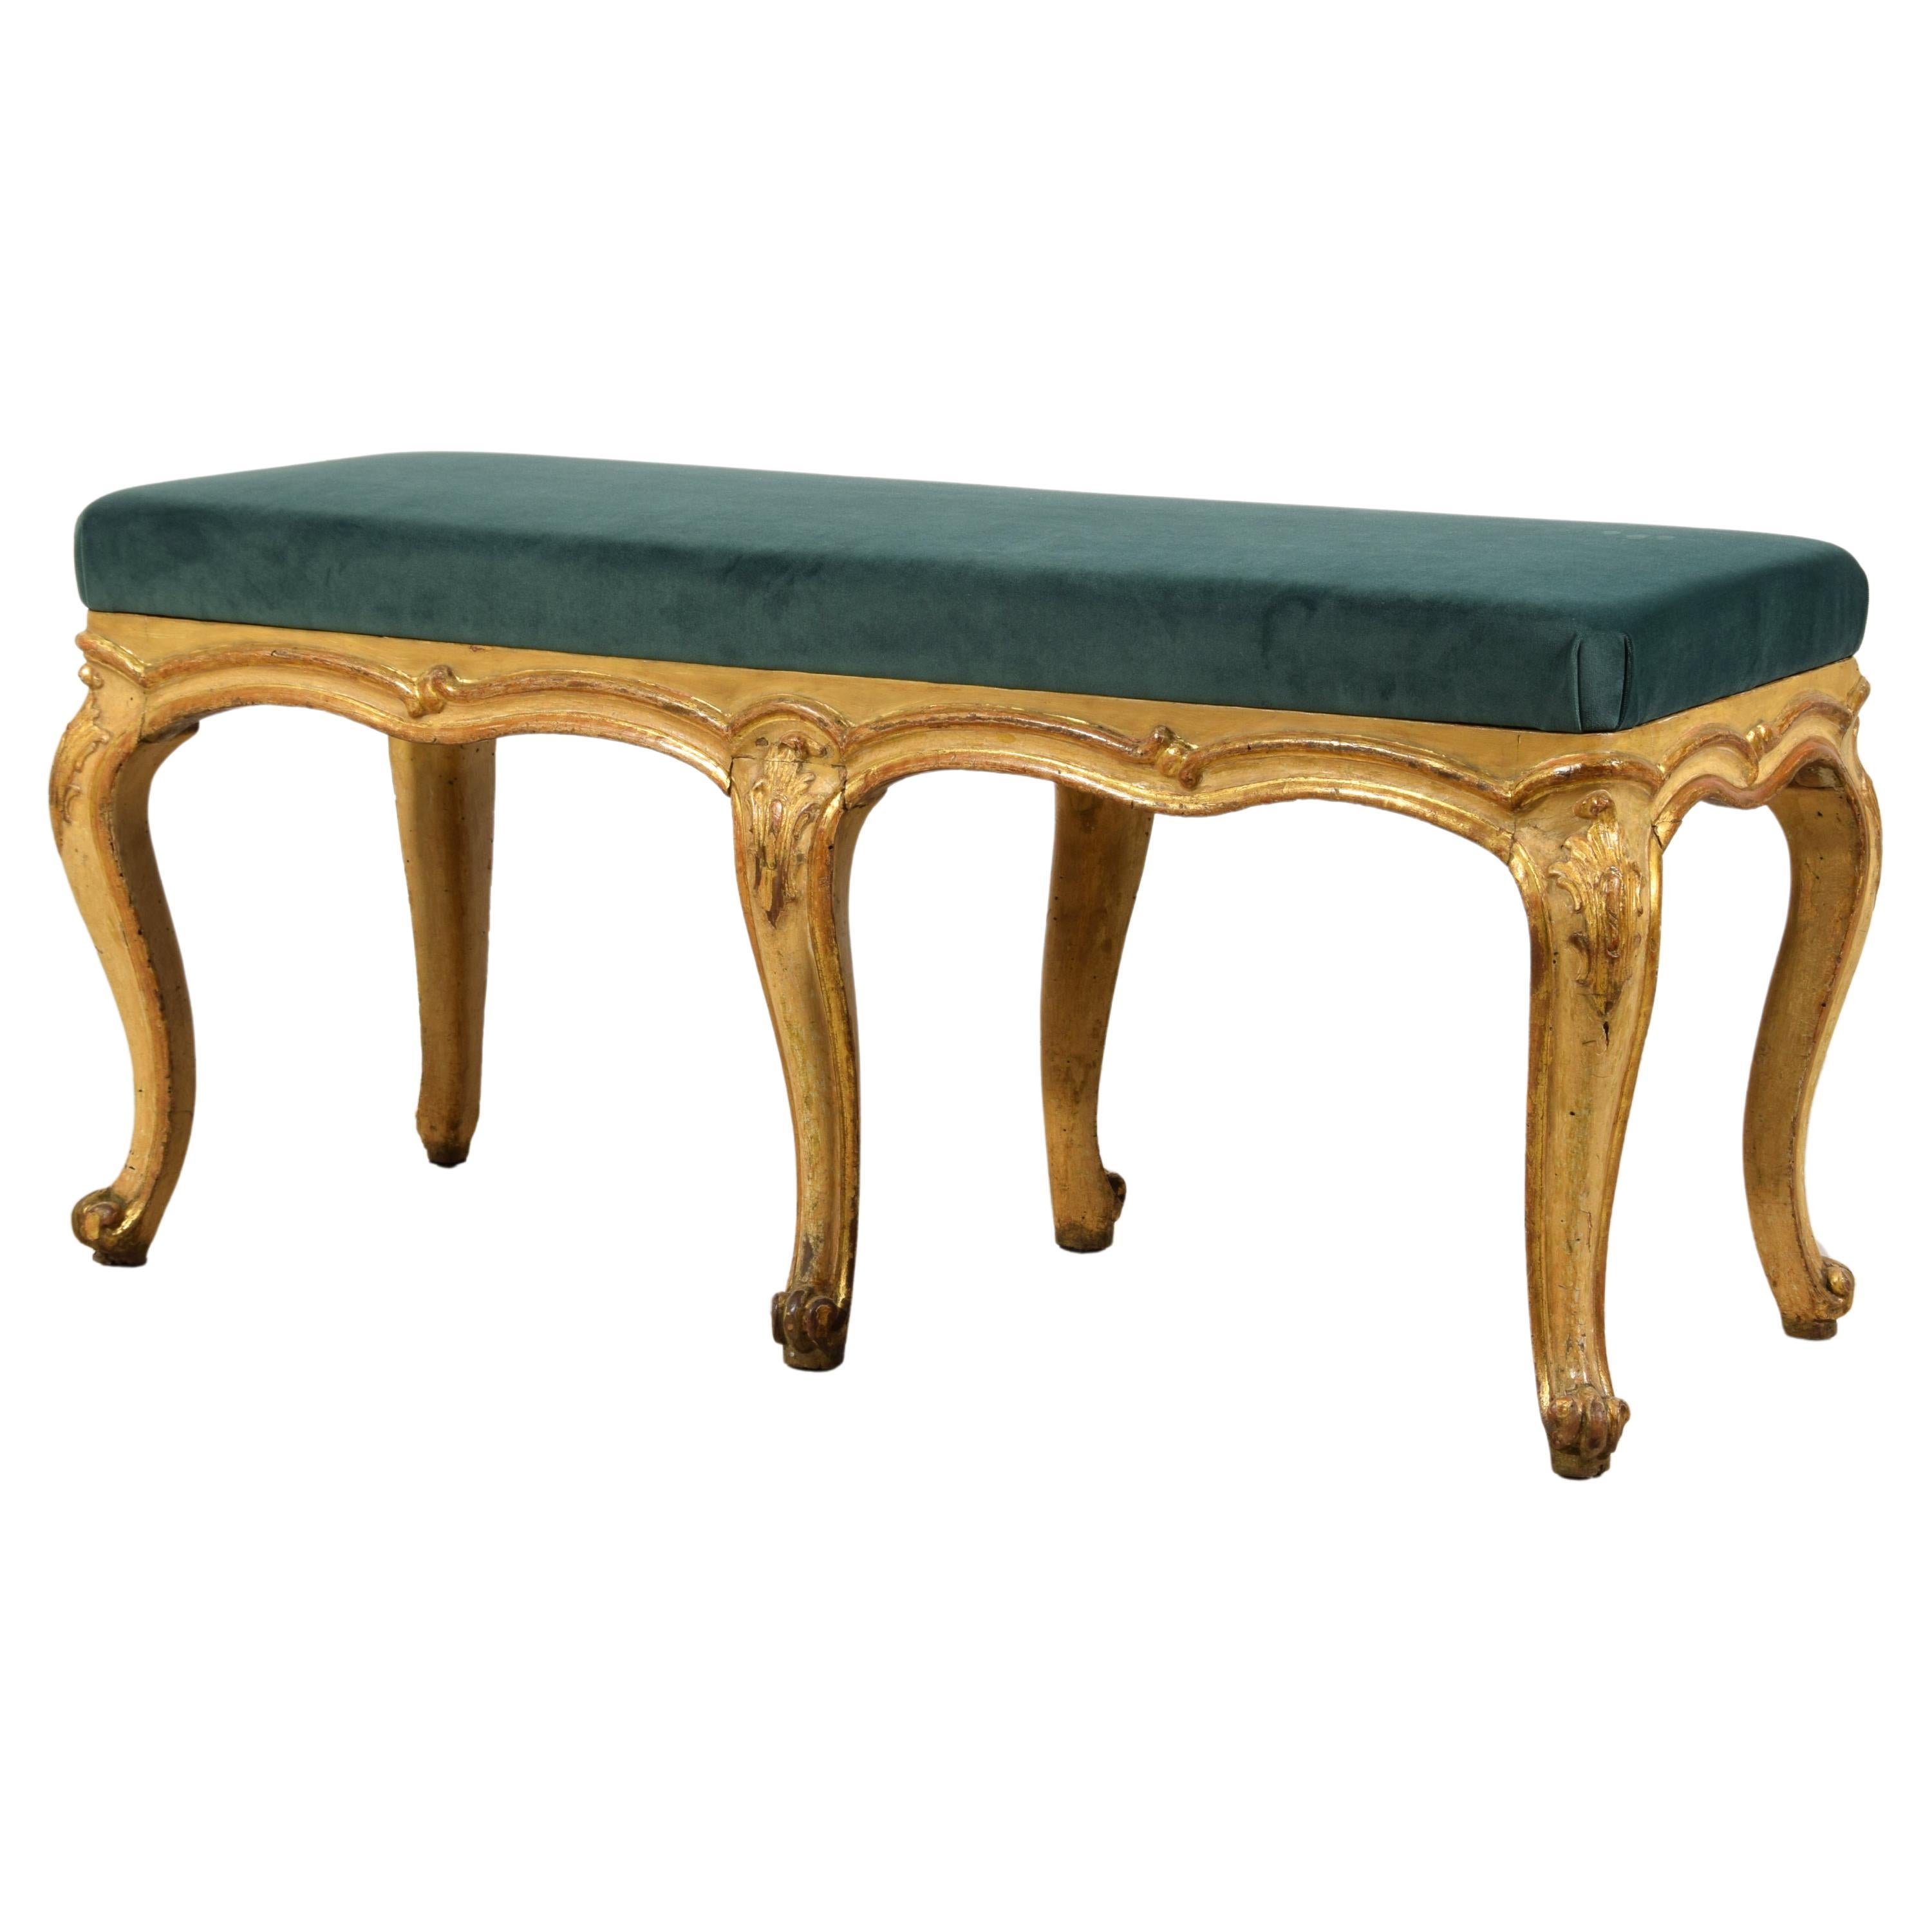 18th century, Italian Rococo Lacquered and Gilt Wood Bench 